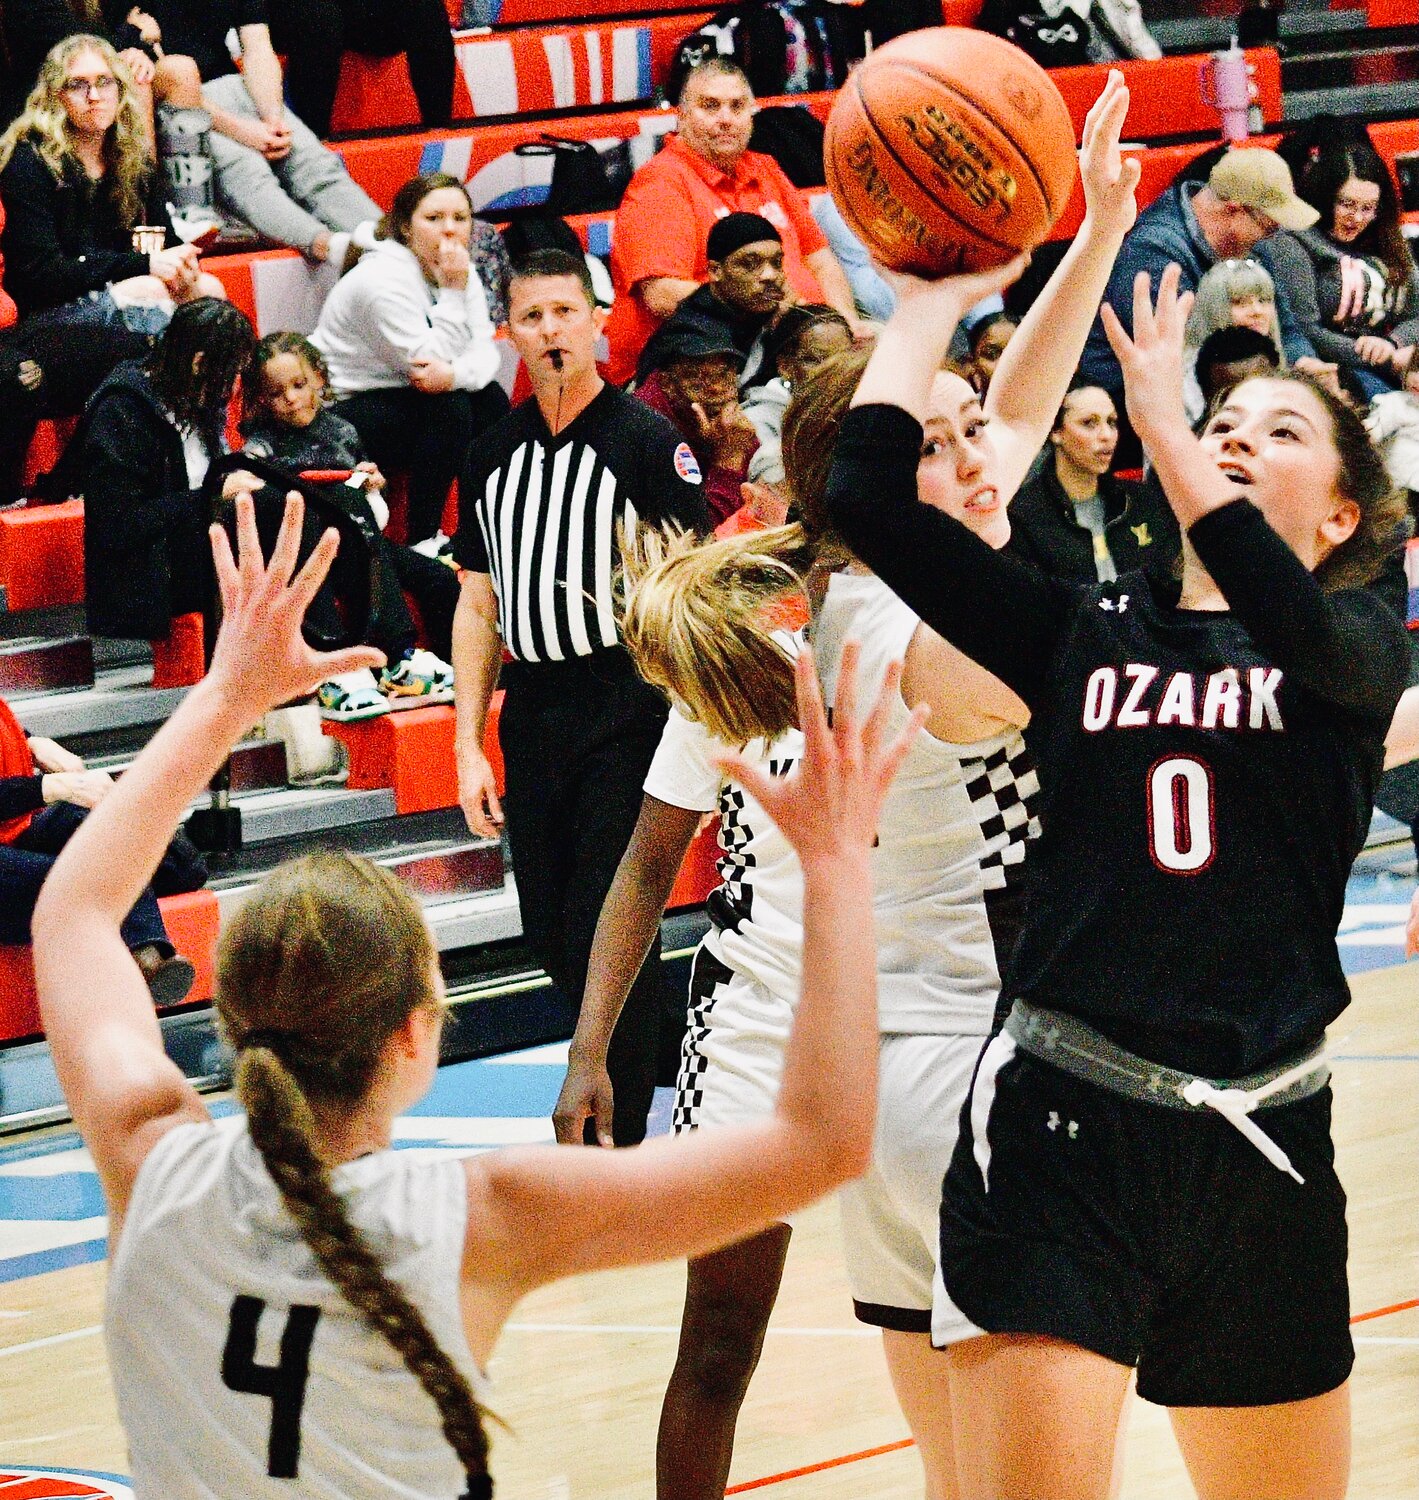 OZARK'S KORI ROUSSELL shoots in front of a defender.